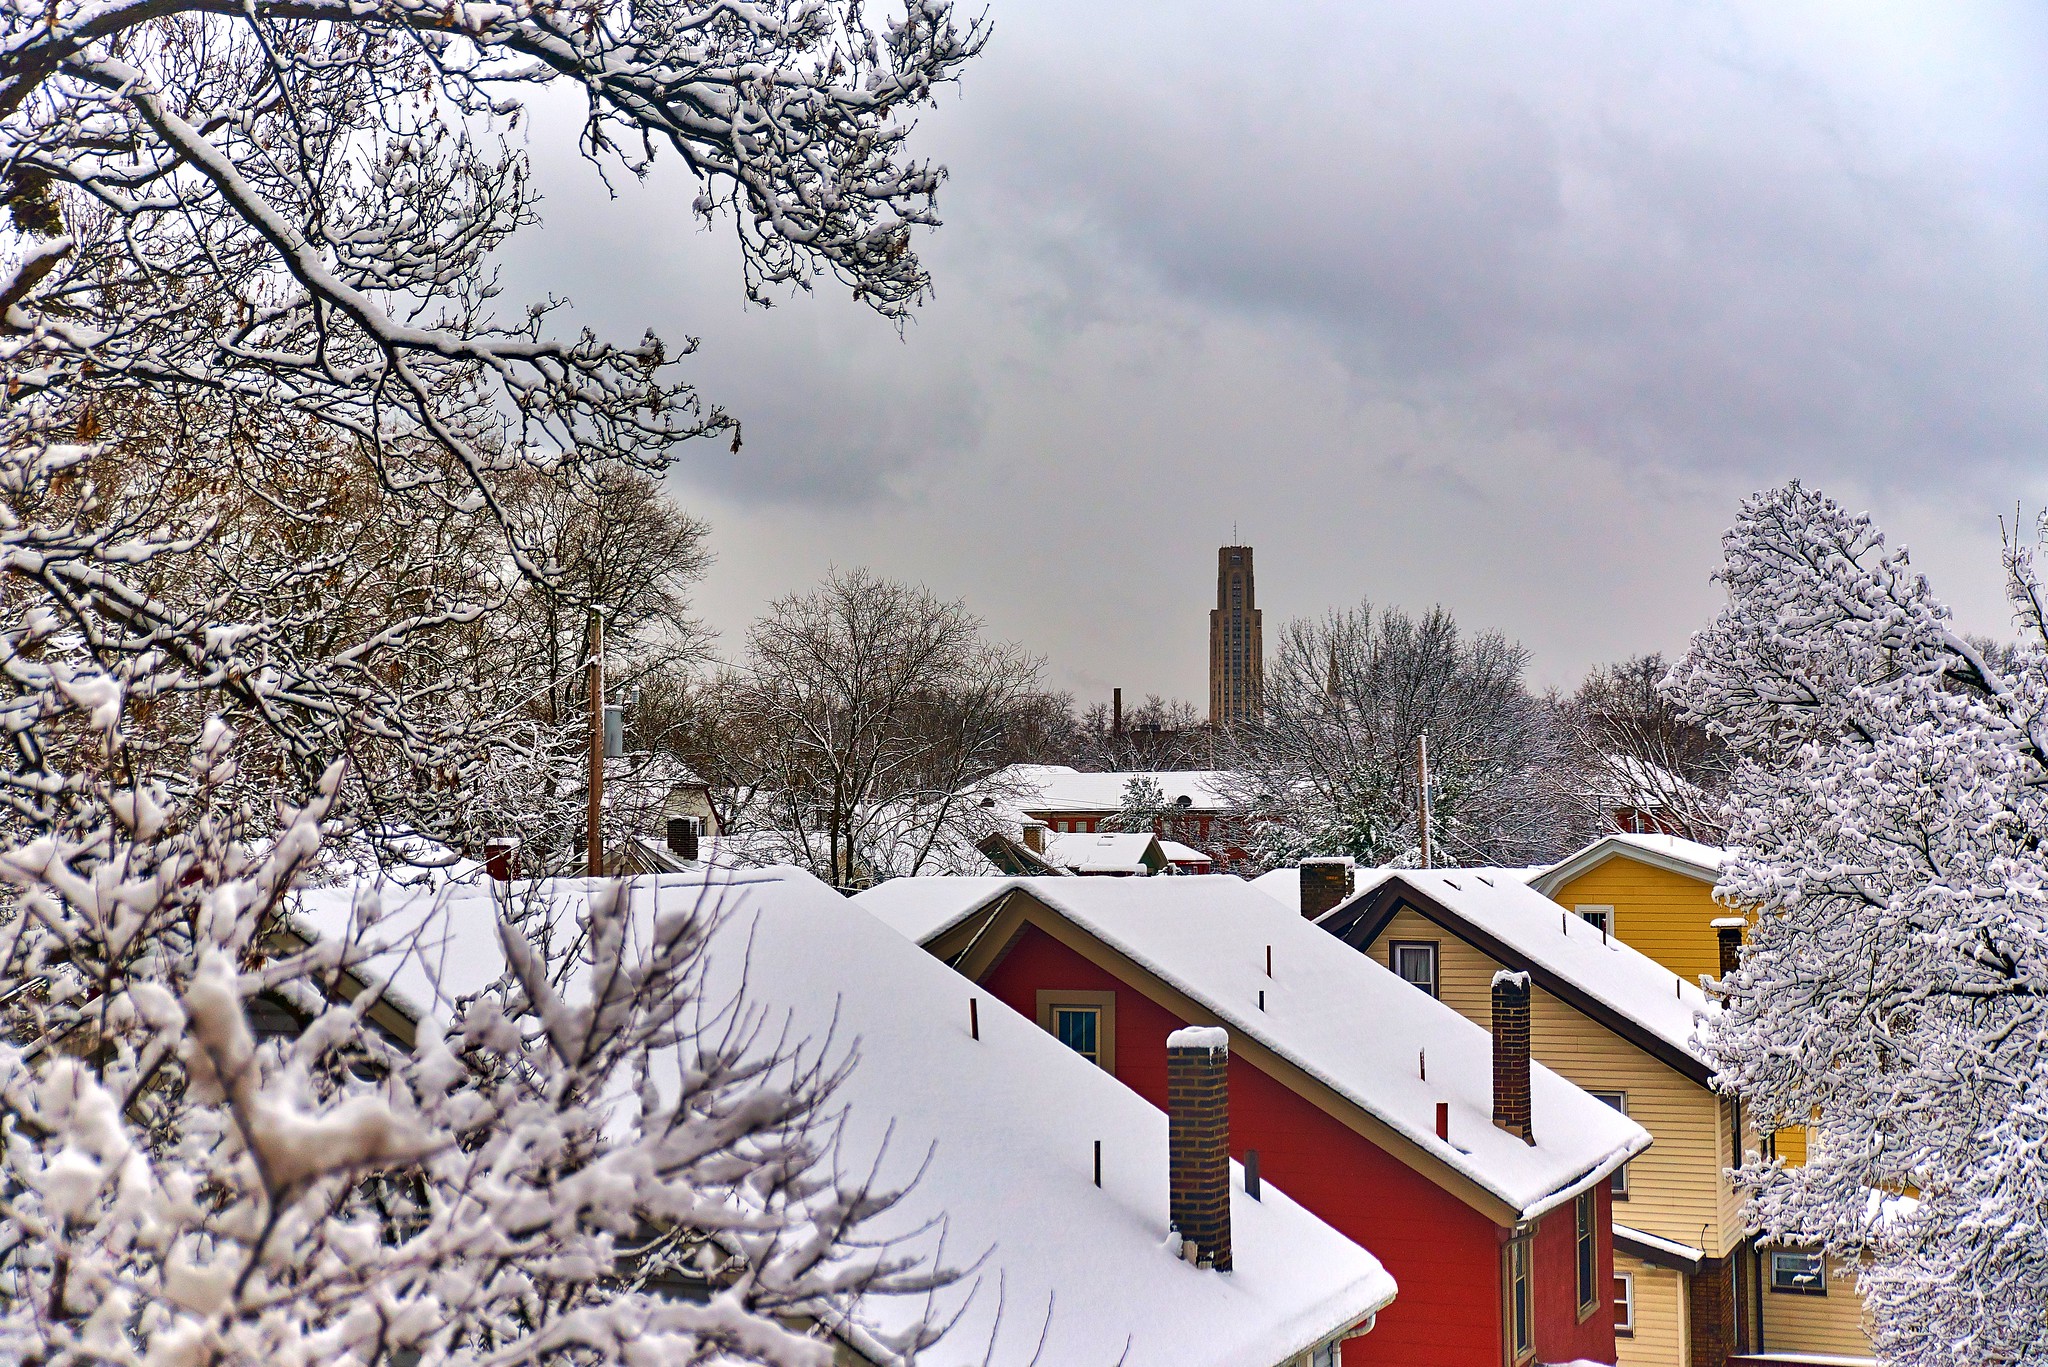 Snow lying on rooftops and trees with a background of a cloudy sky.